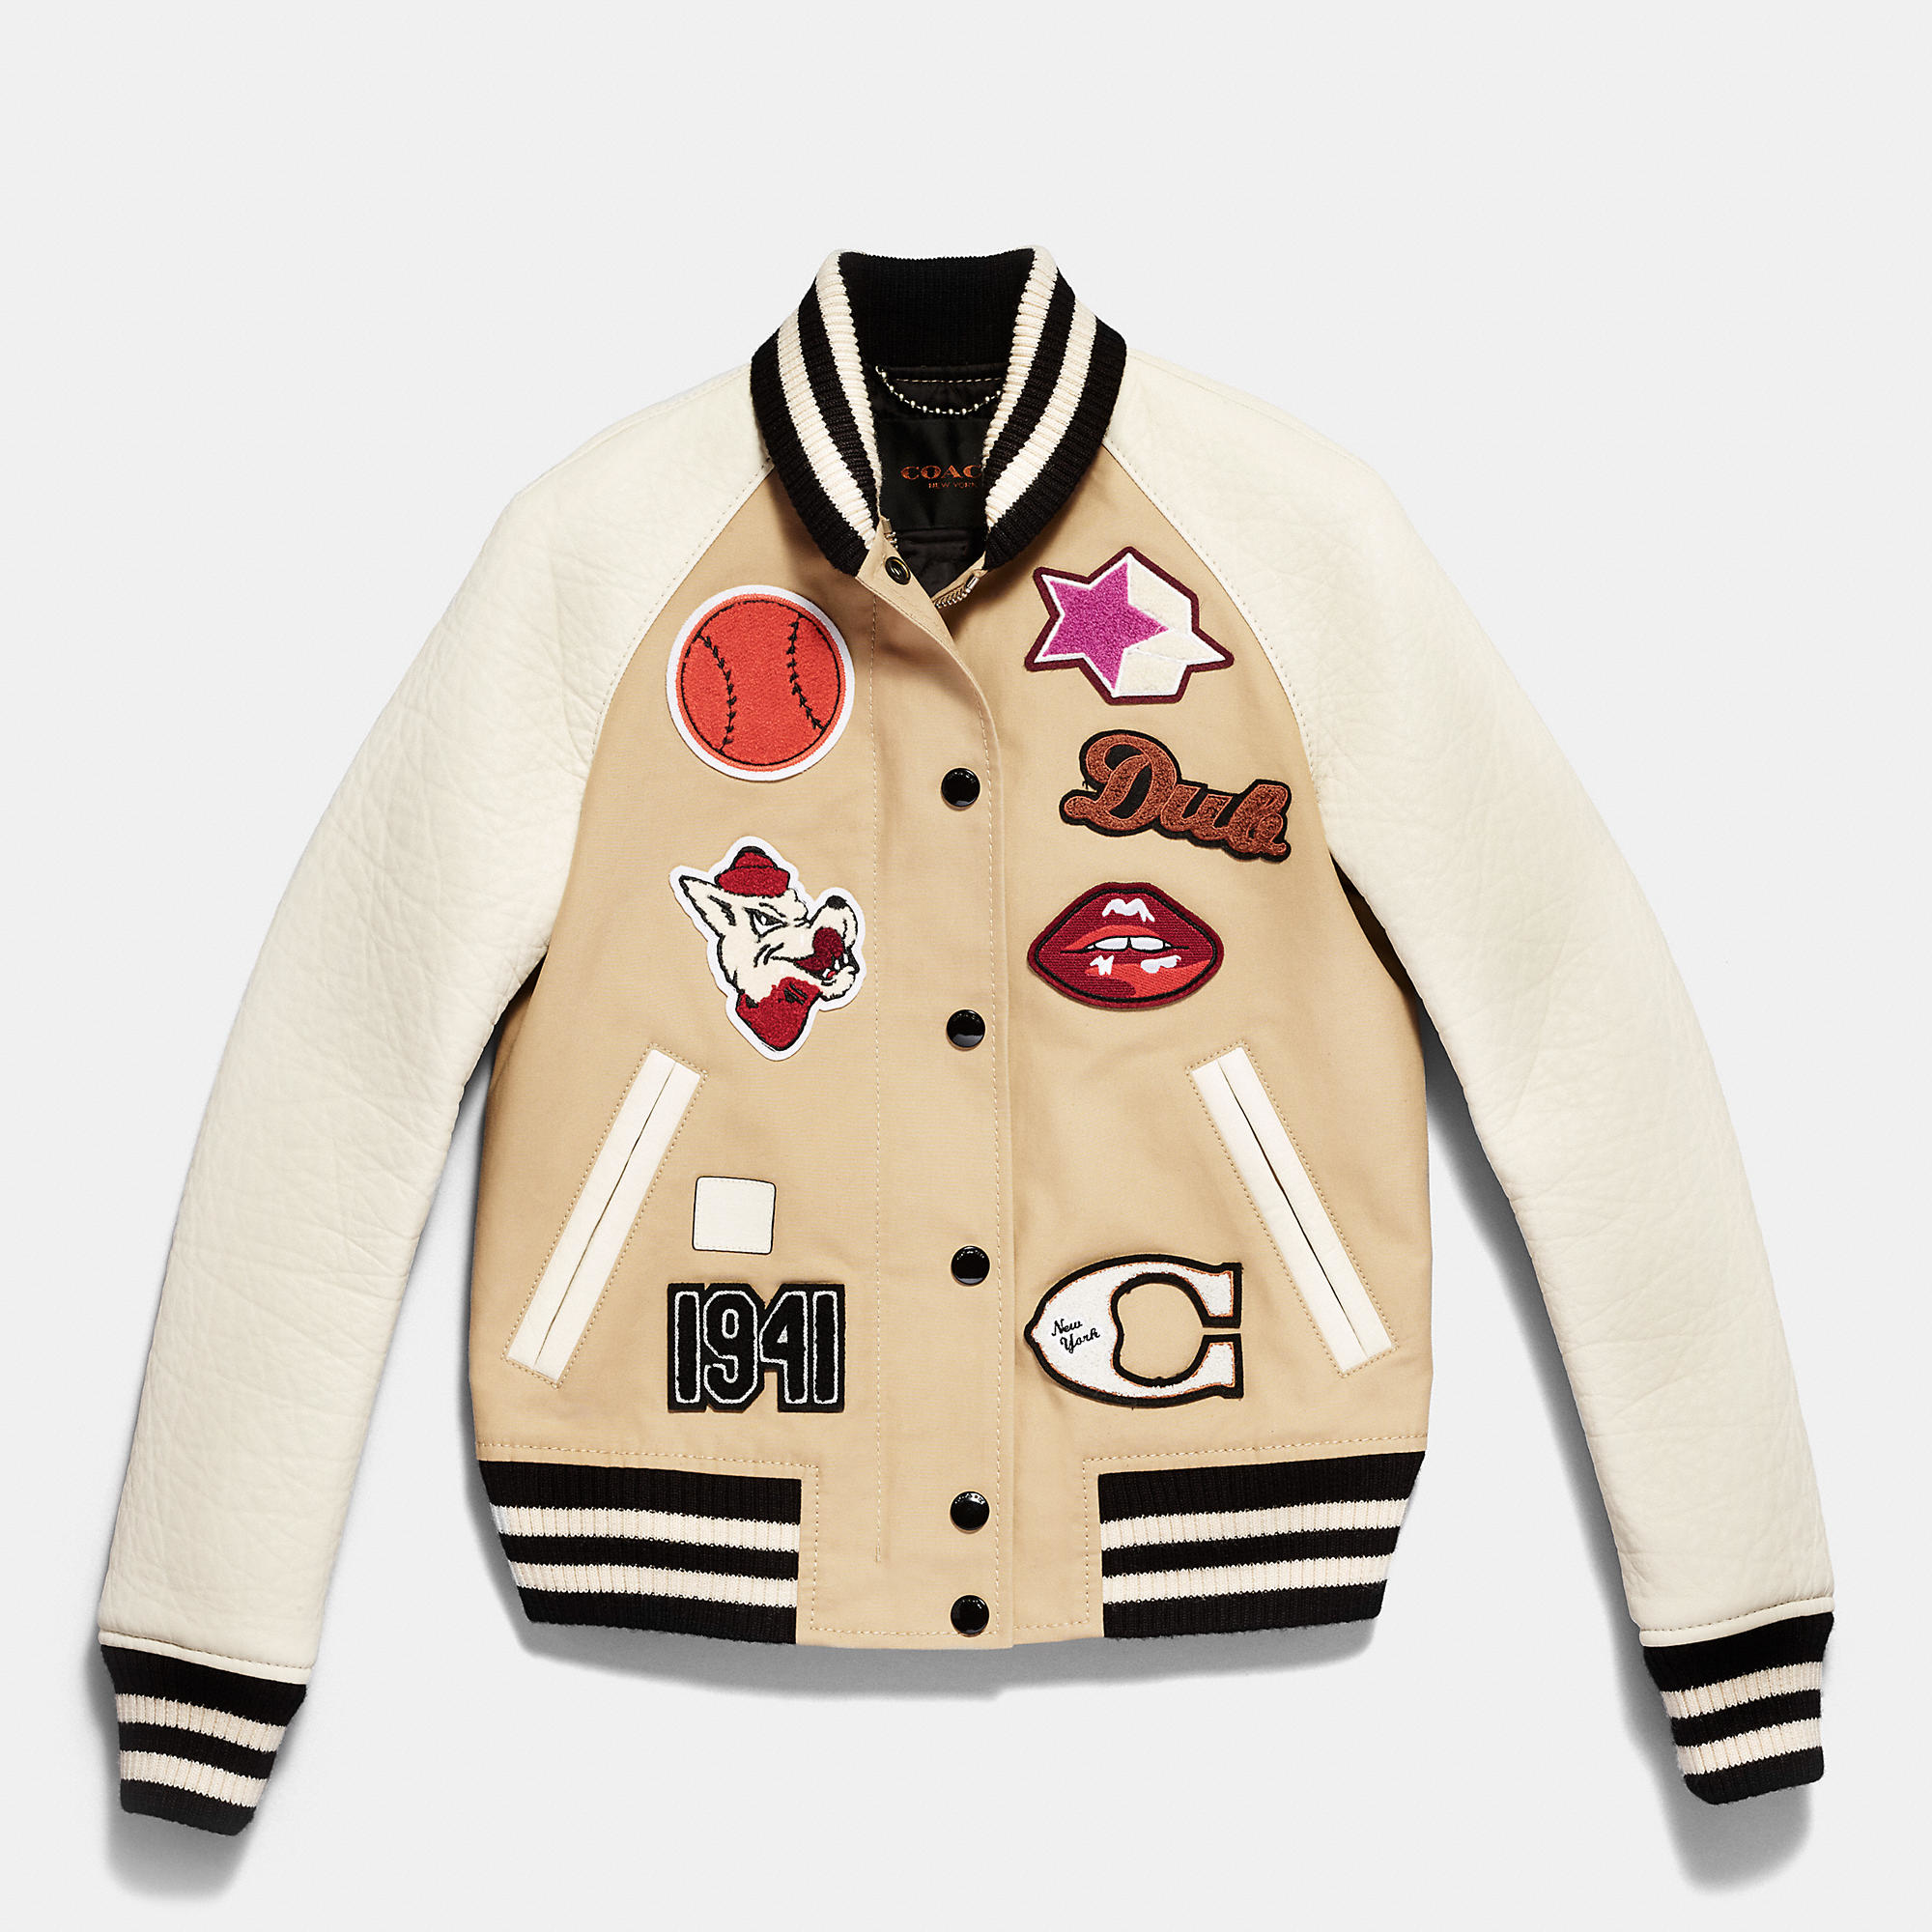 Lyst - Coach Cotton Varsity Jacket in Natural